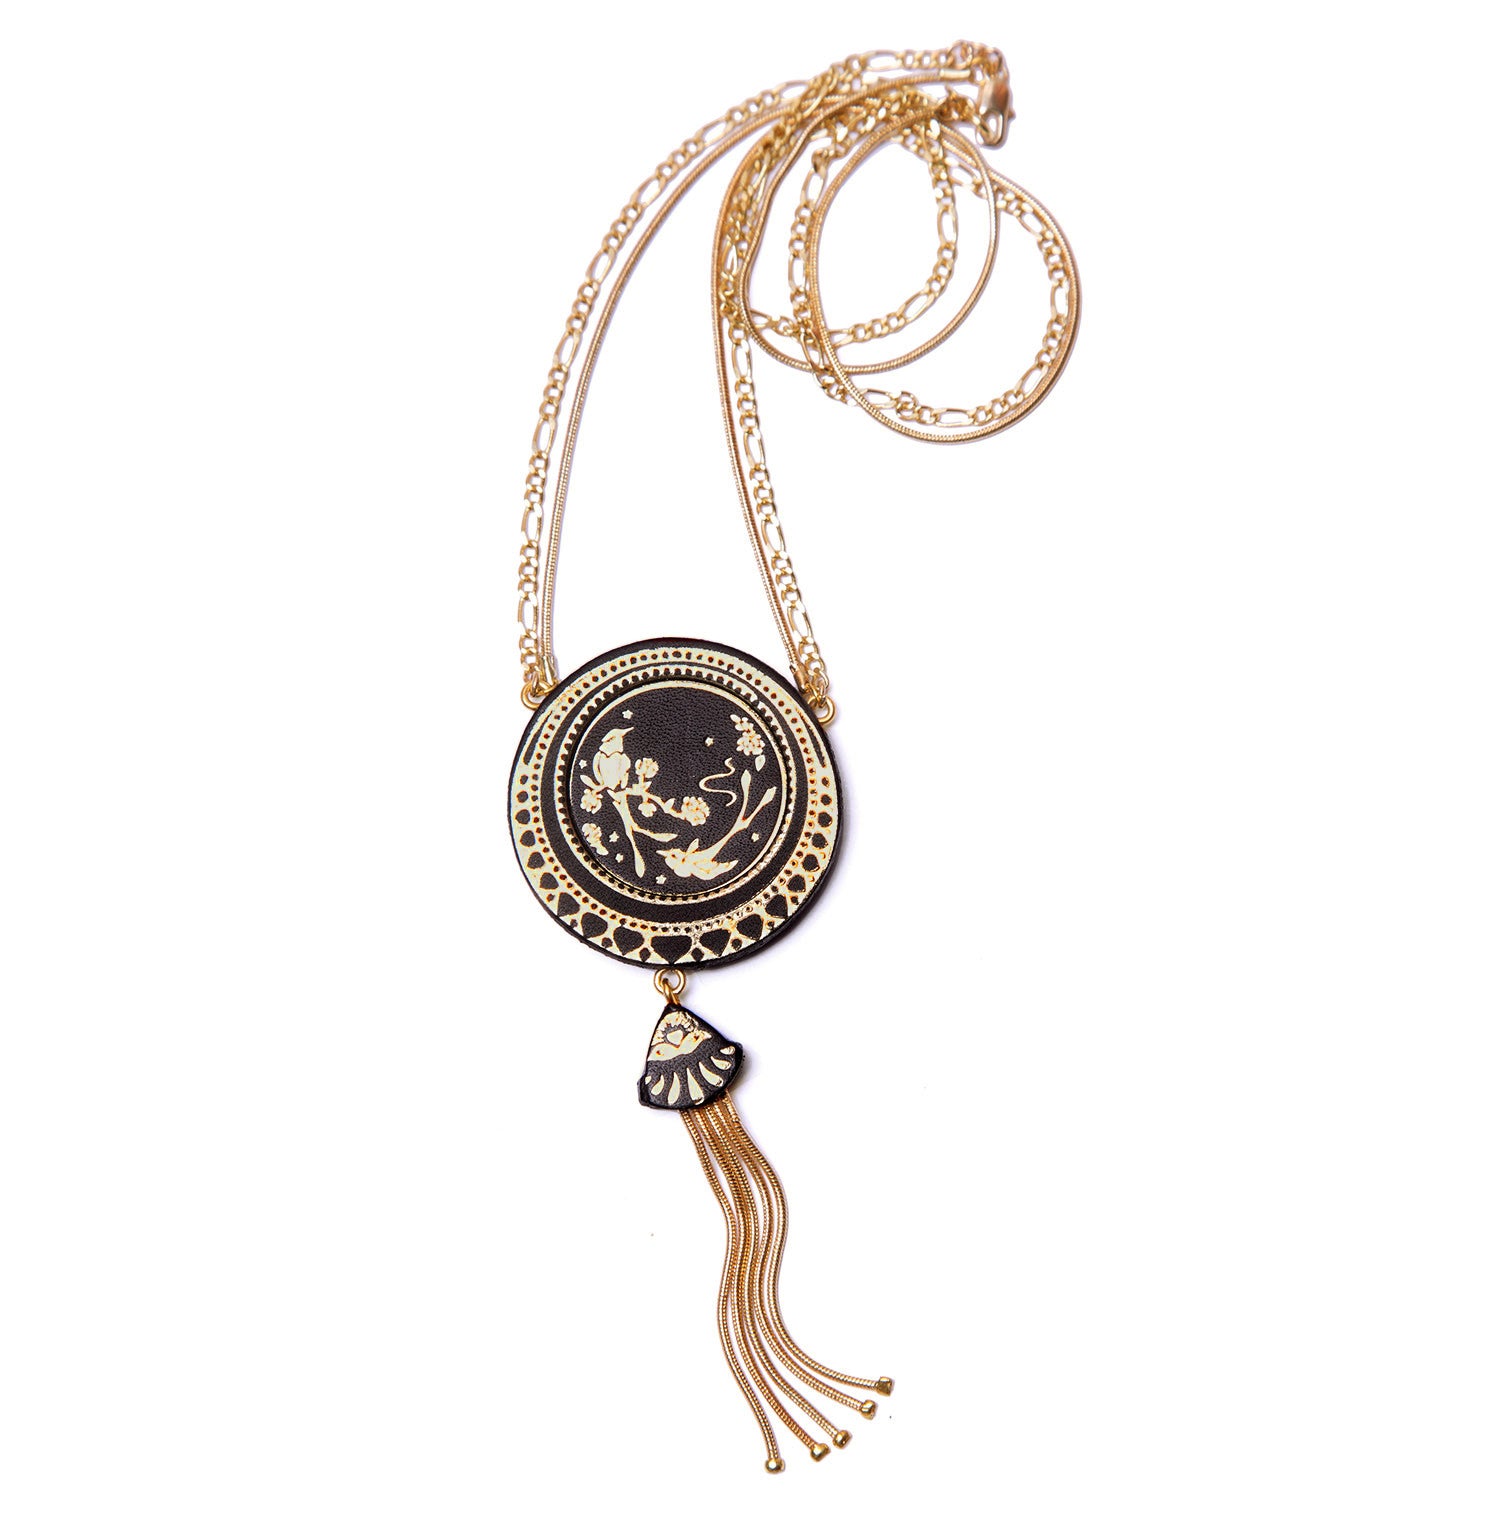 shiny gold leather medallion, tasselled necklace, chain tassel